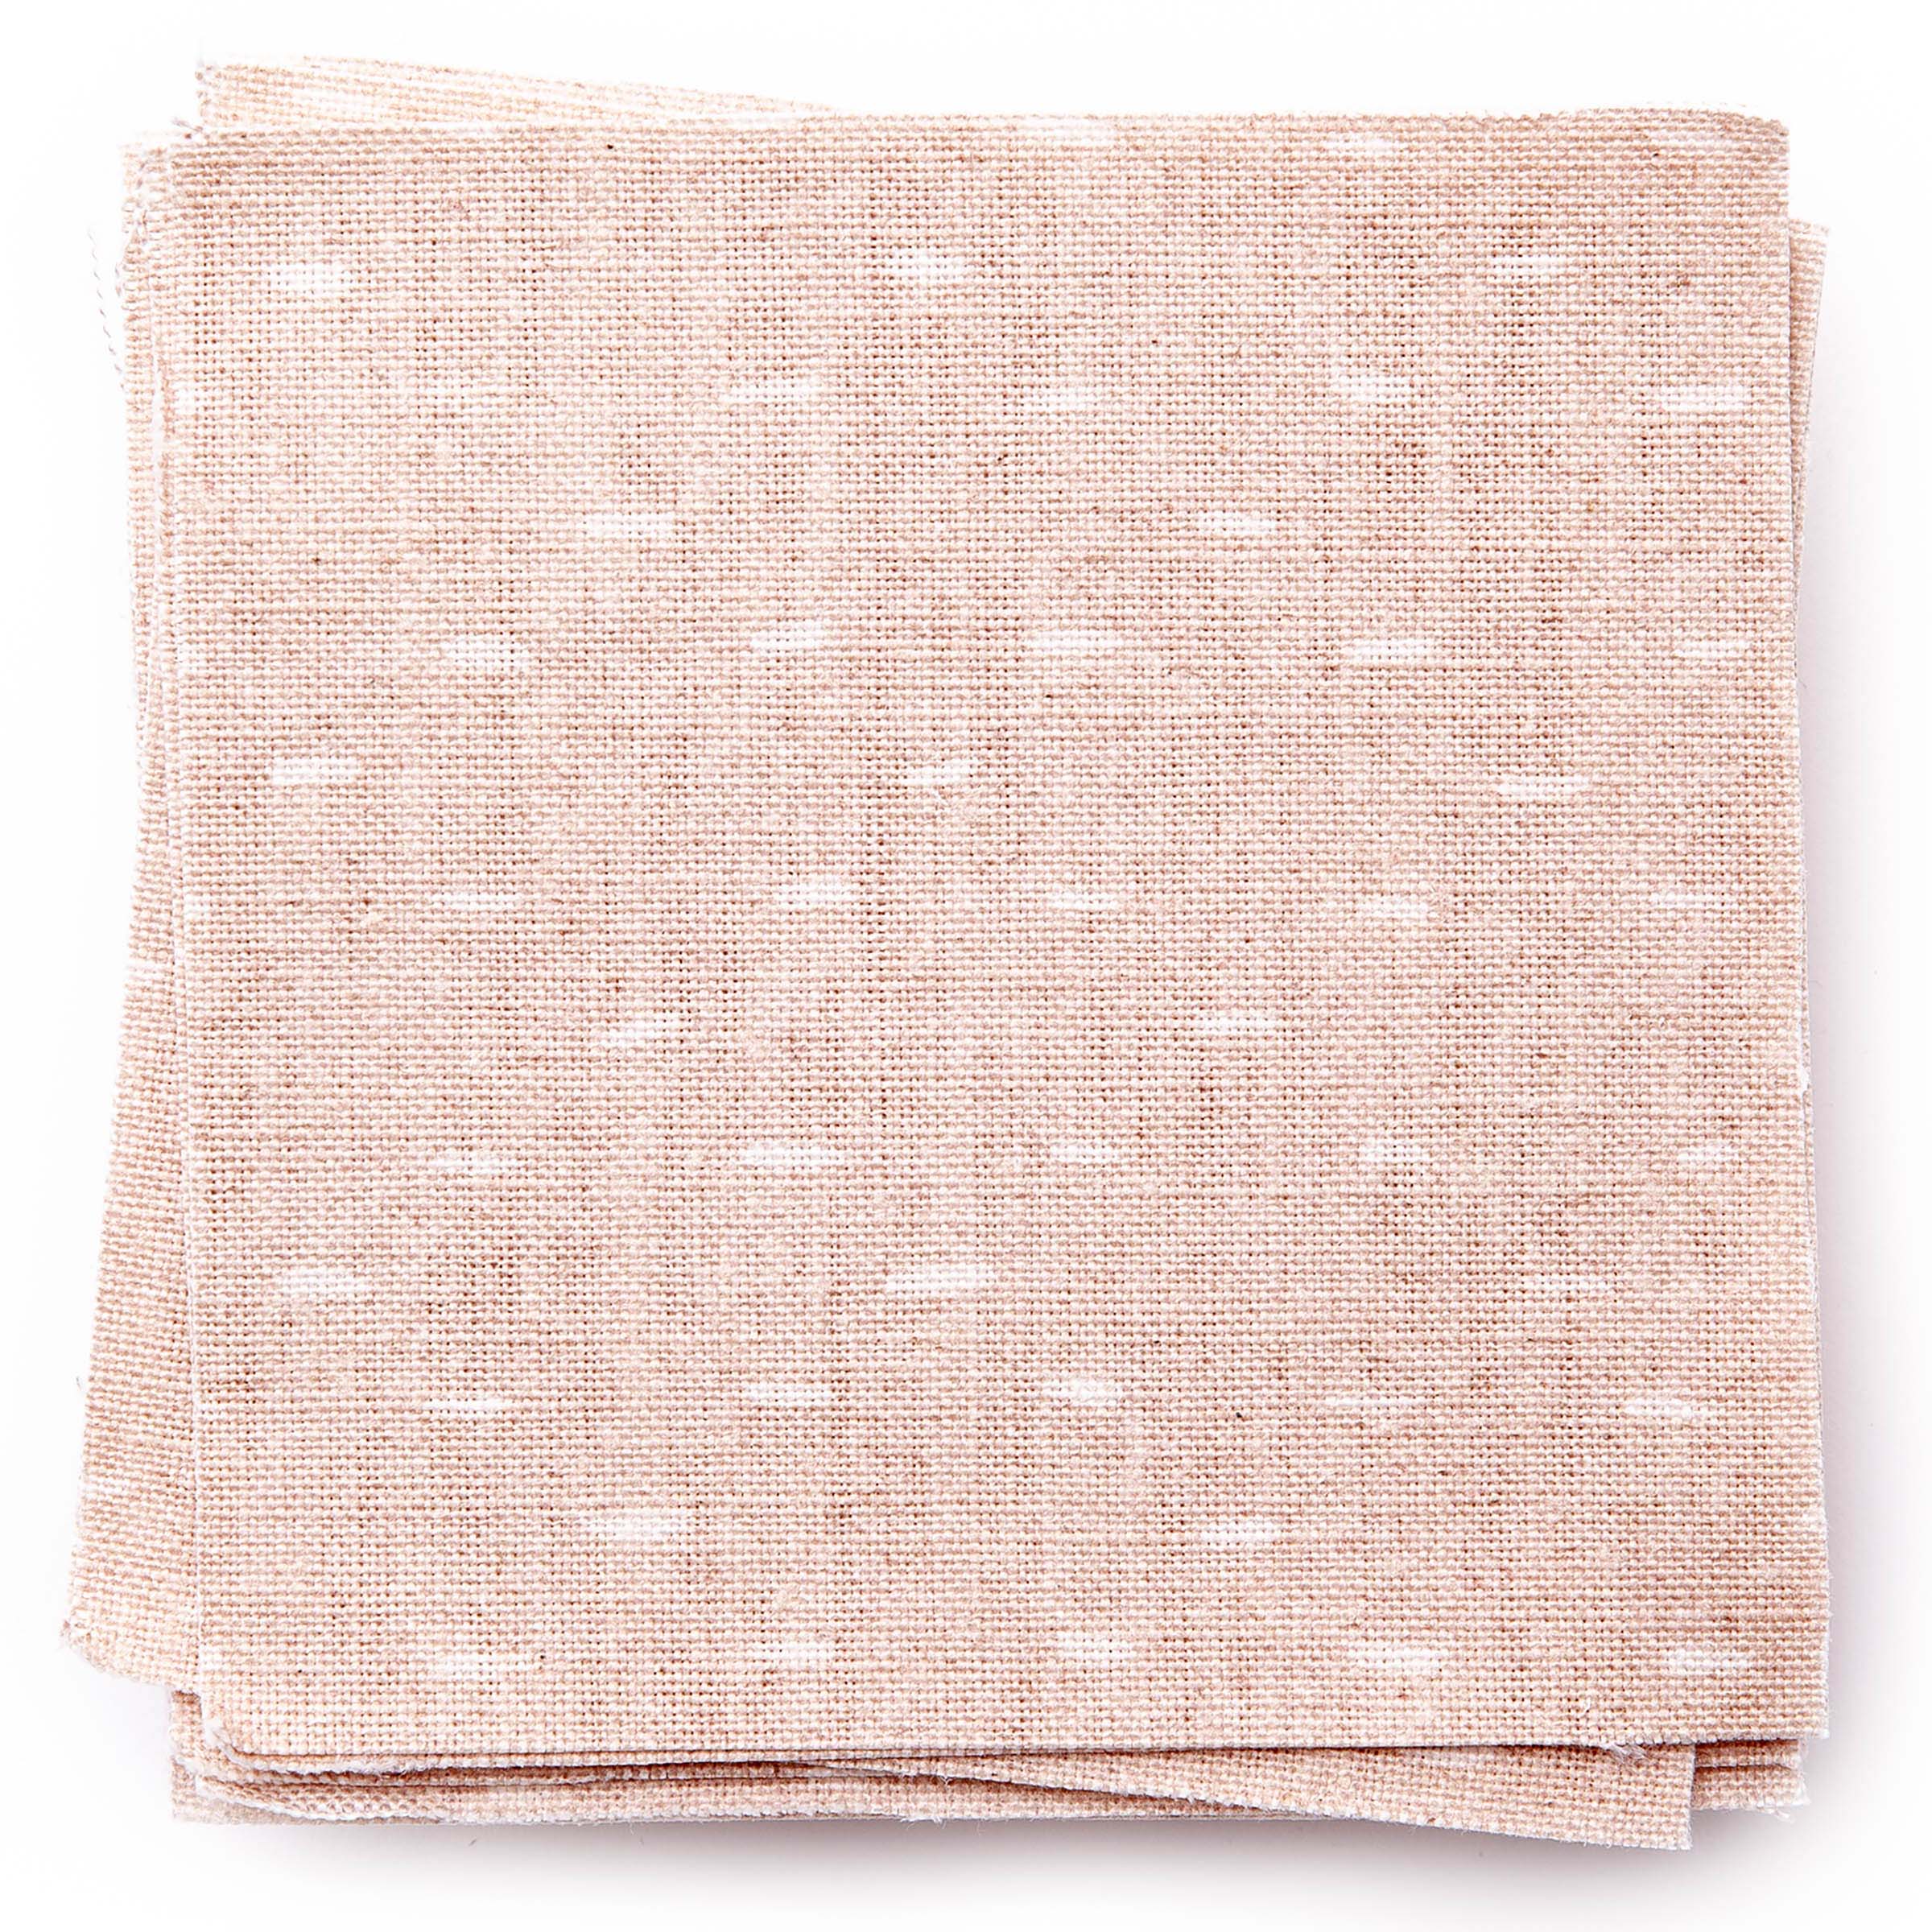 A stack of fabric swatches in a dotted diamond grid in white on a light pink field.